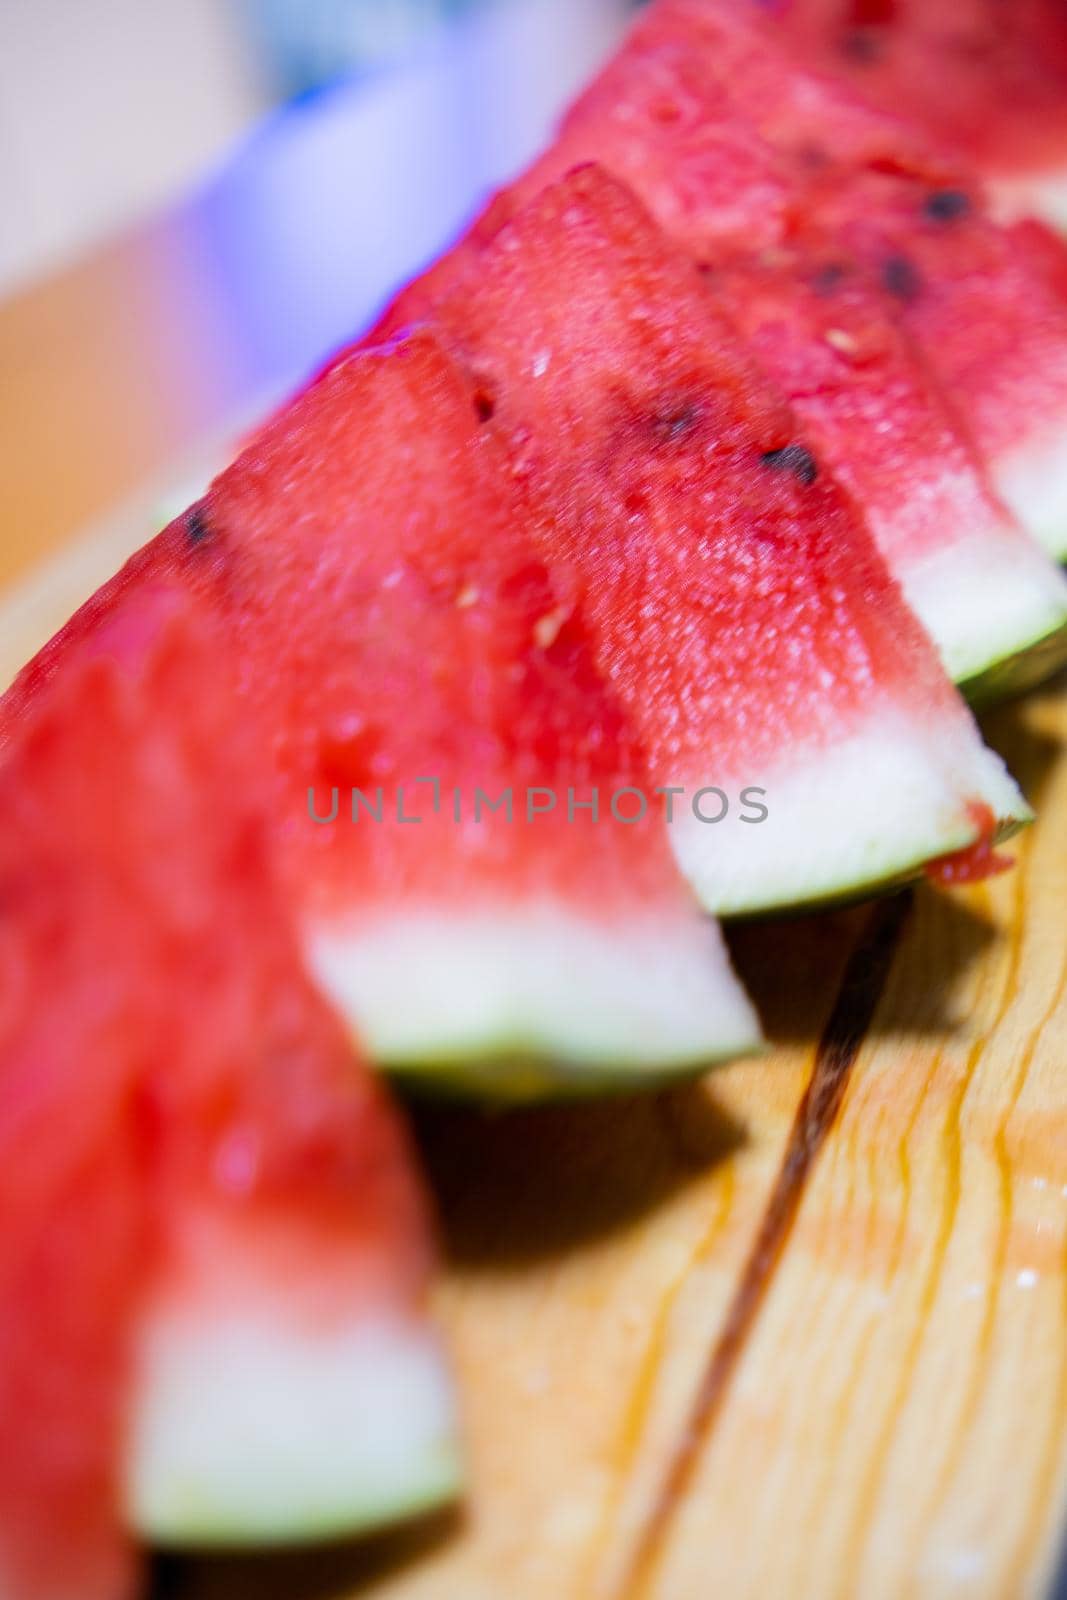 Close-up of fresh and juicy watermelon slices on wooden surface. Row of tasty sliced red tropical fruit on wooden table with blurry background. Healthy food and eating